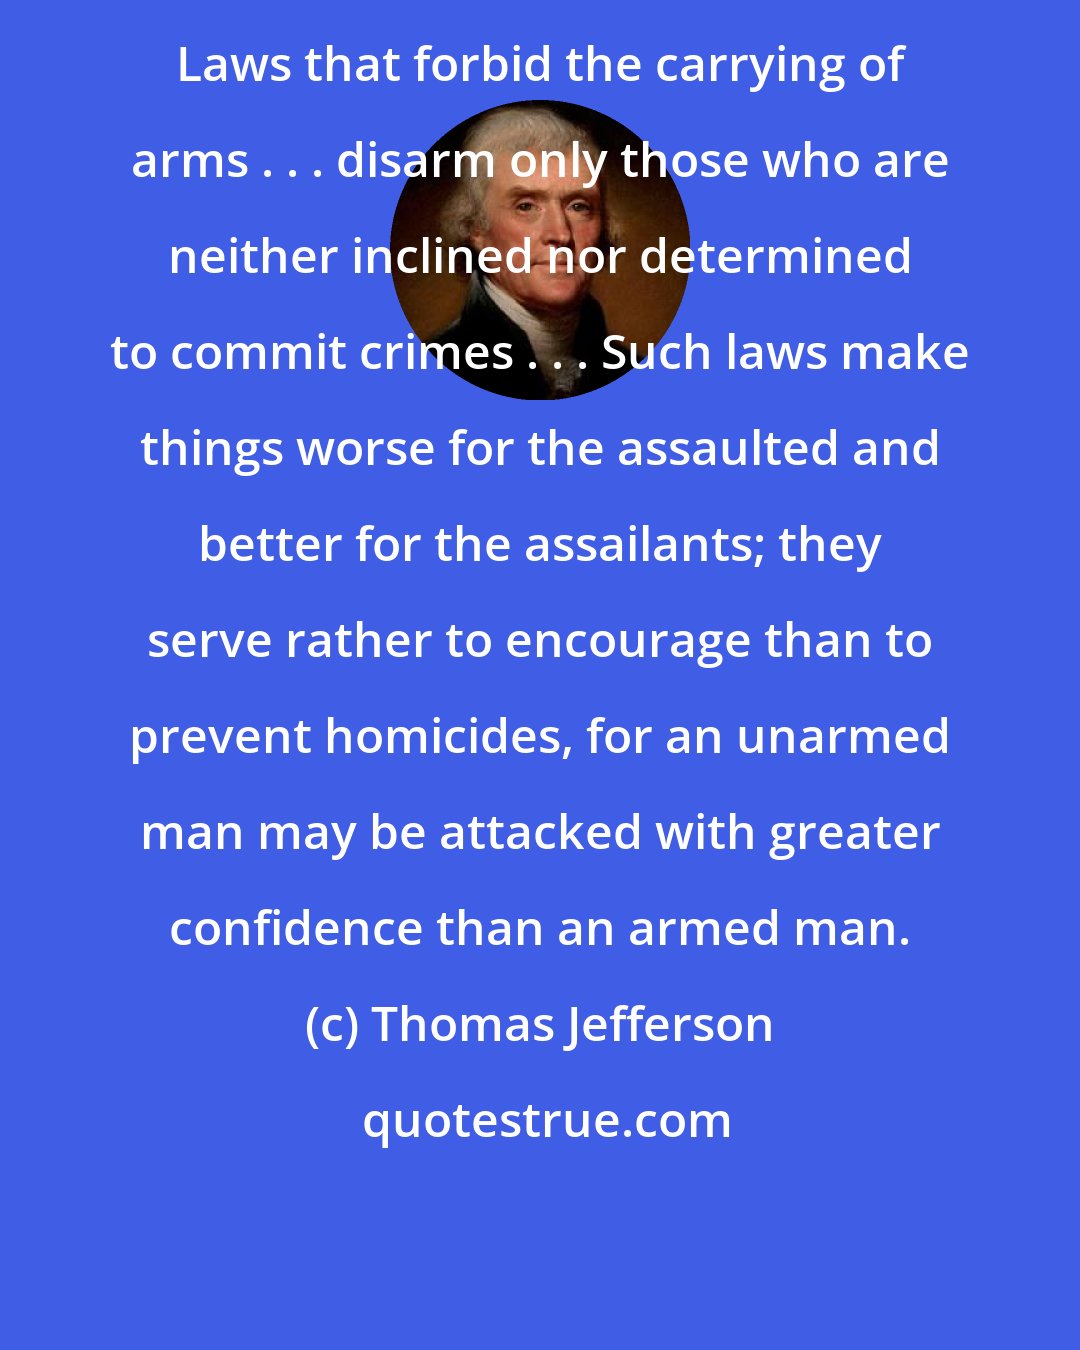 Thomas Jefferson: Laws that forbid the carrying of arms . . . disarm only those who are neither inclined nor determined to commit crimes . . . Such laws make things worse for the assaulted and better for the assailants; they serve rather to encourage than to prevent homicides, for an unarmed man may be attacked with greater confidence than an armed man.